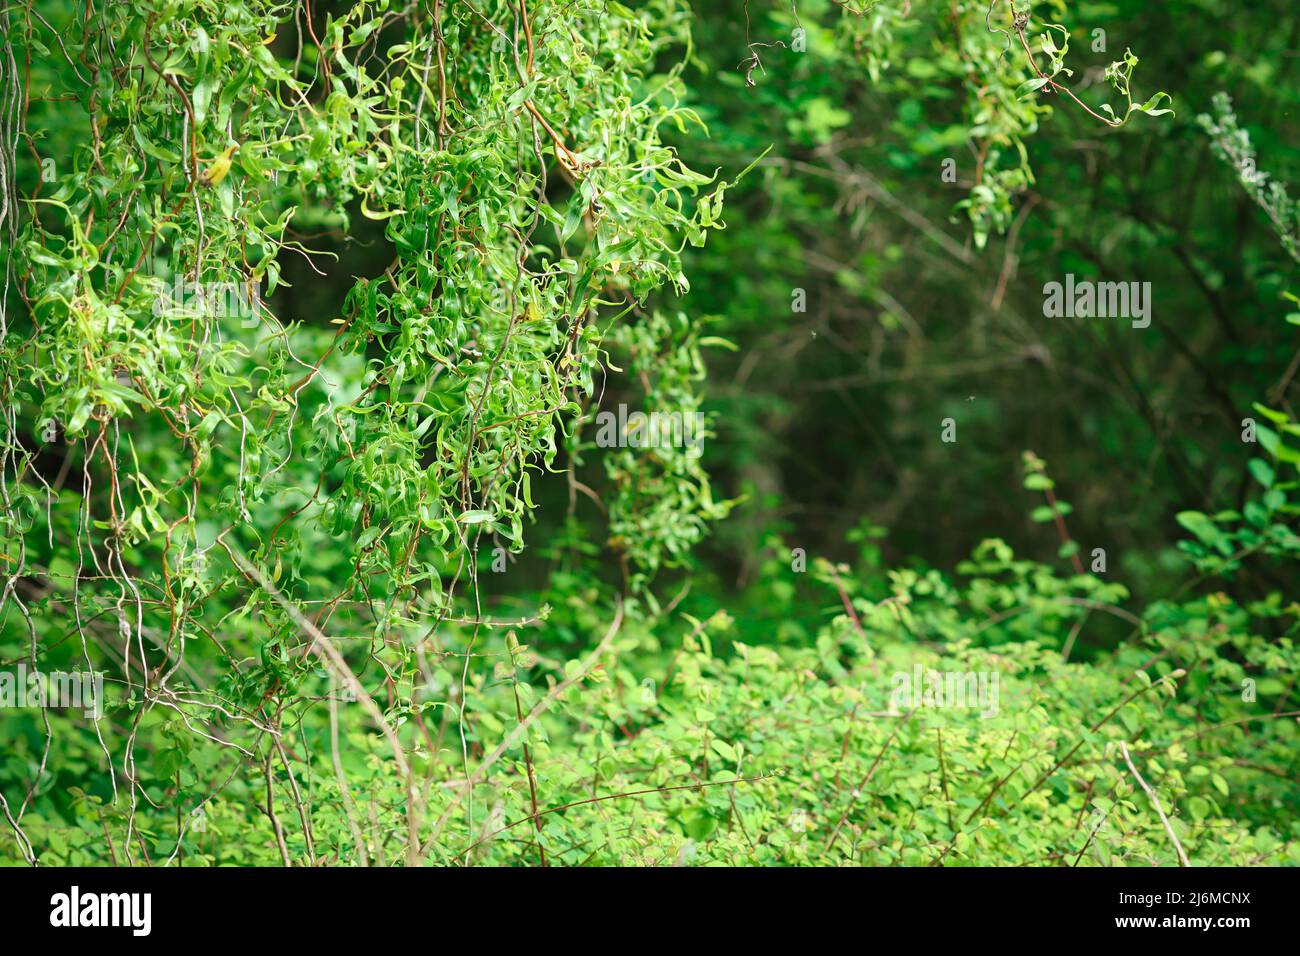 Tree and natural foliage in very green colors Stock Photo